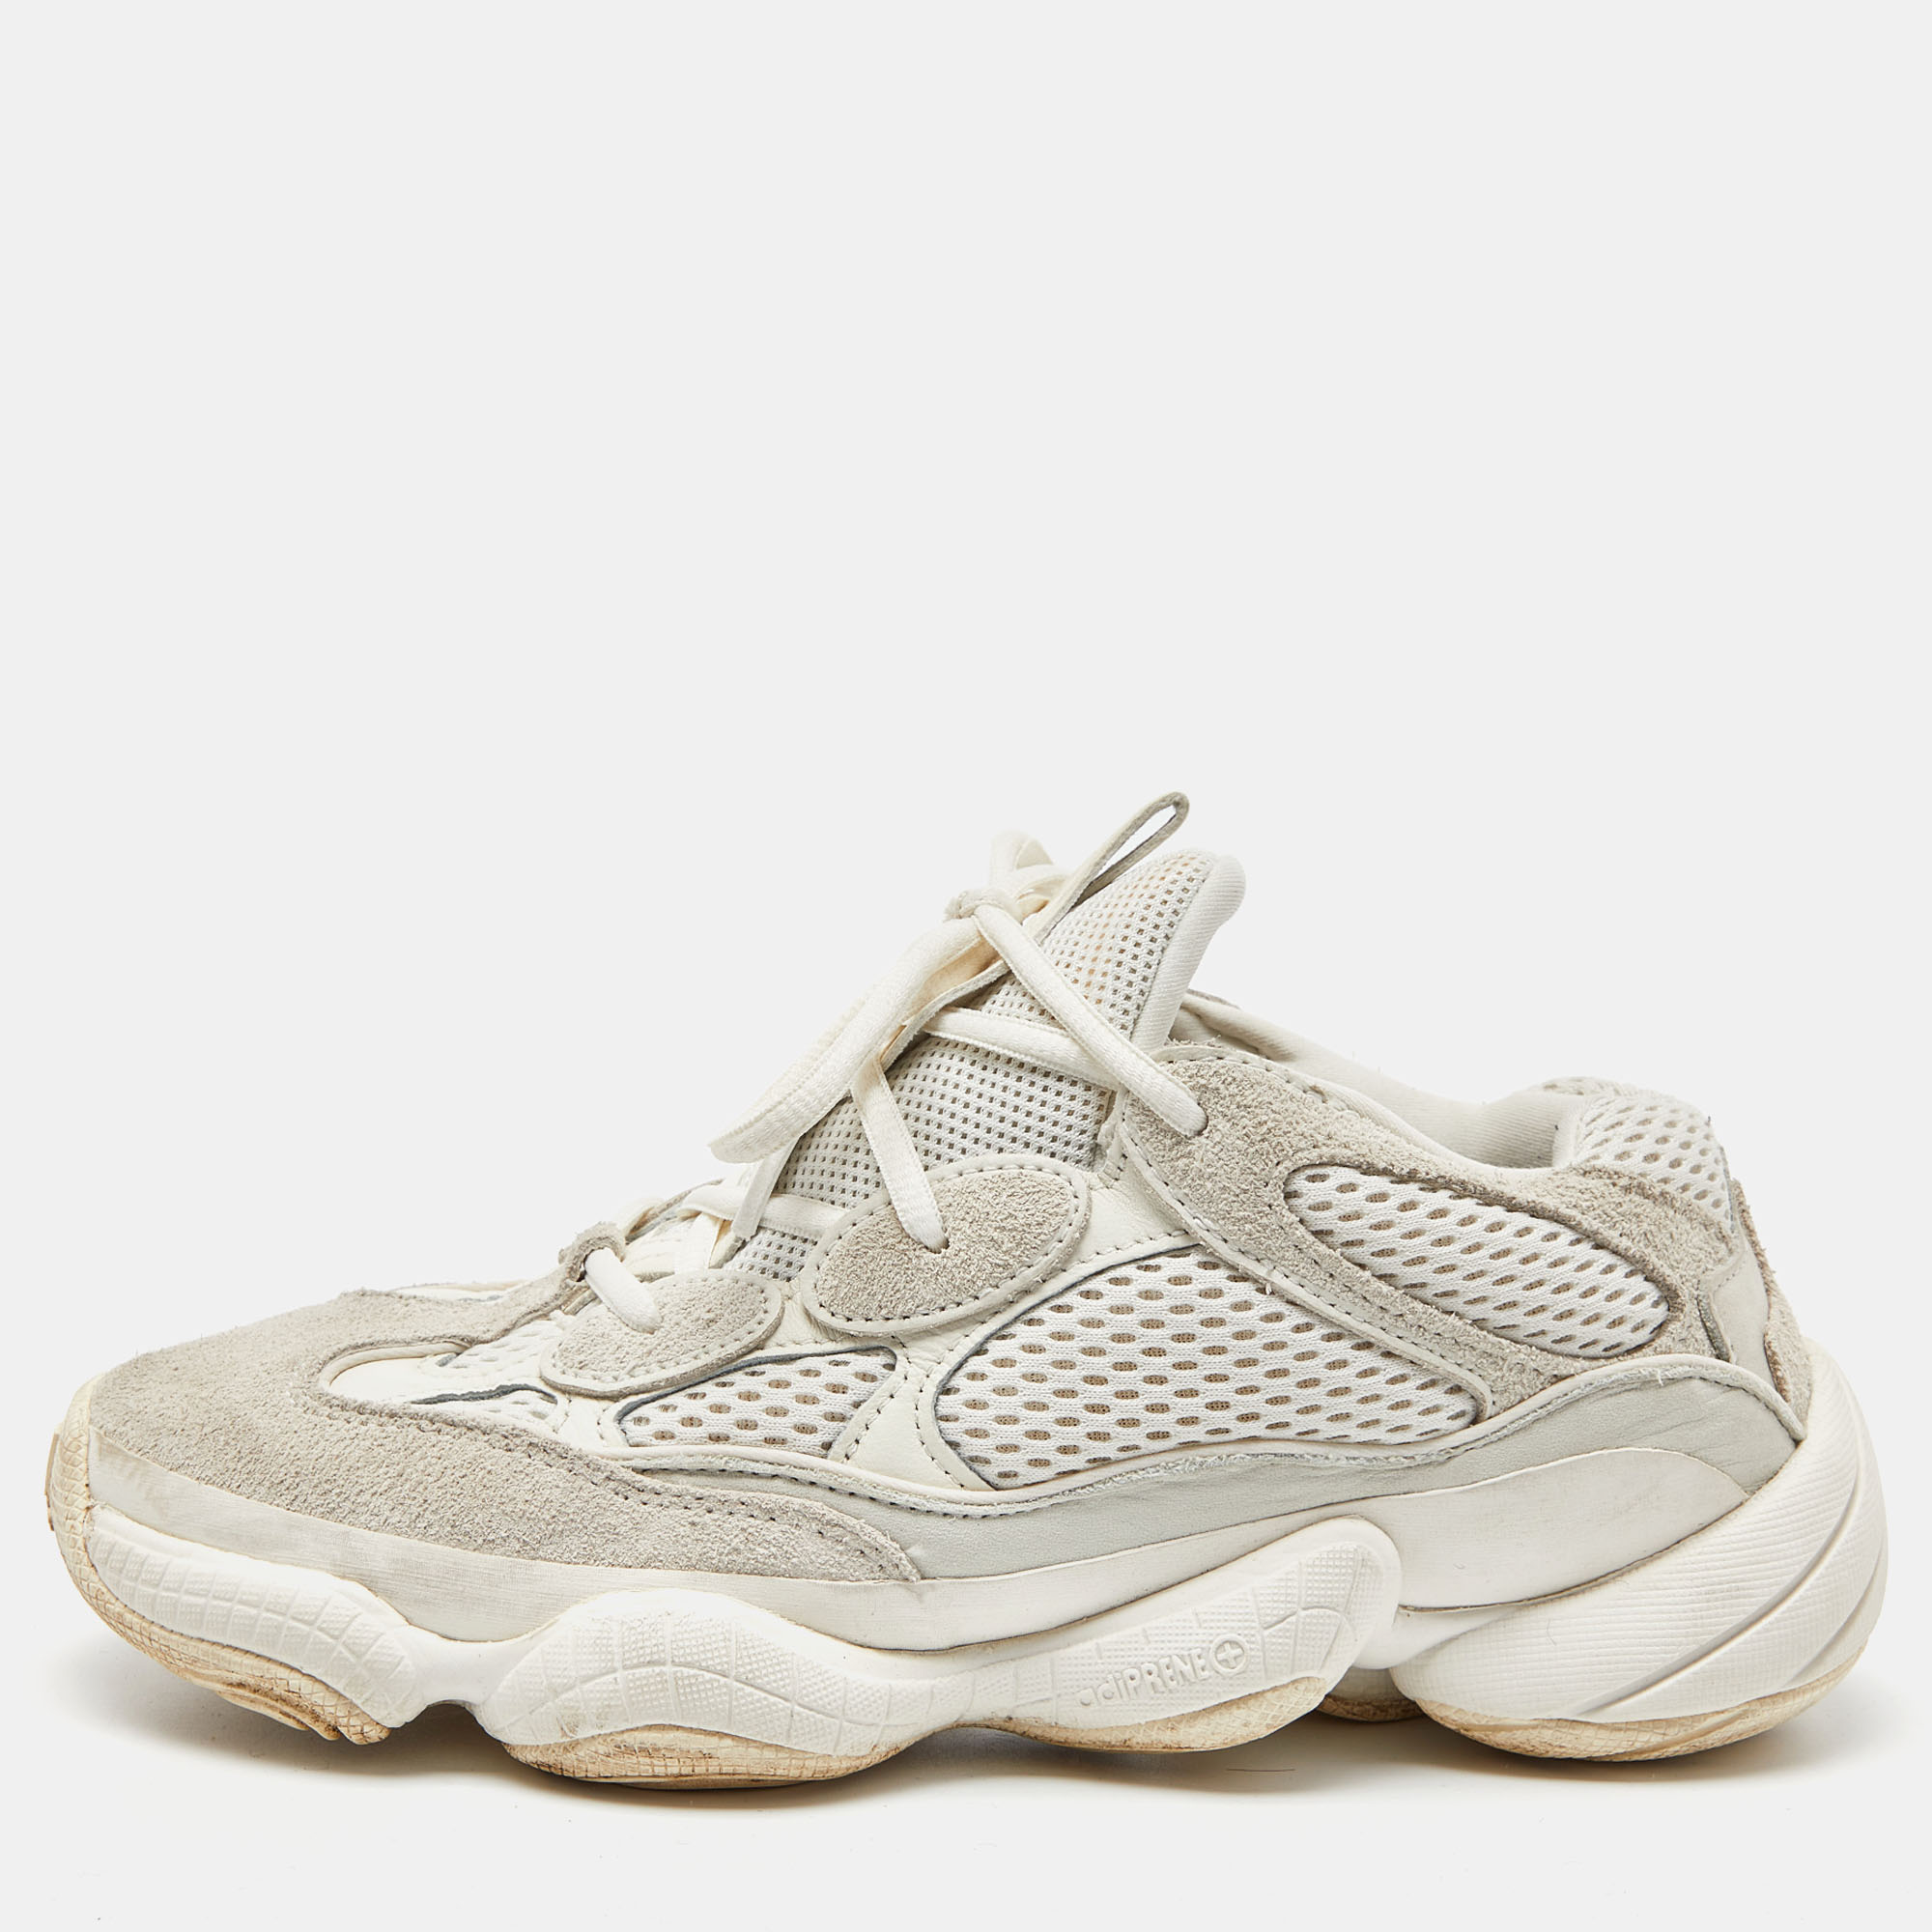 Pre-owned Yeezy X Adidas White Suede And Mesh Yeezy 500 Bone White Sneakers Size 40